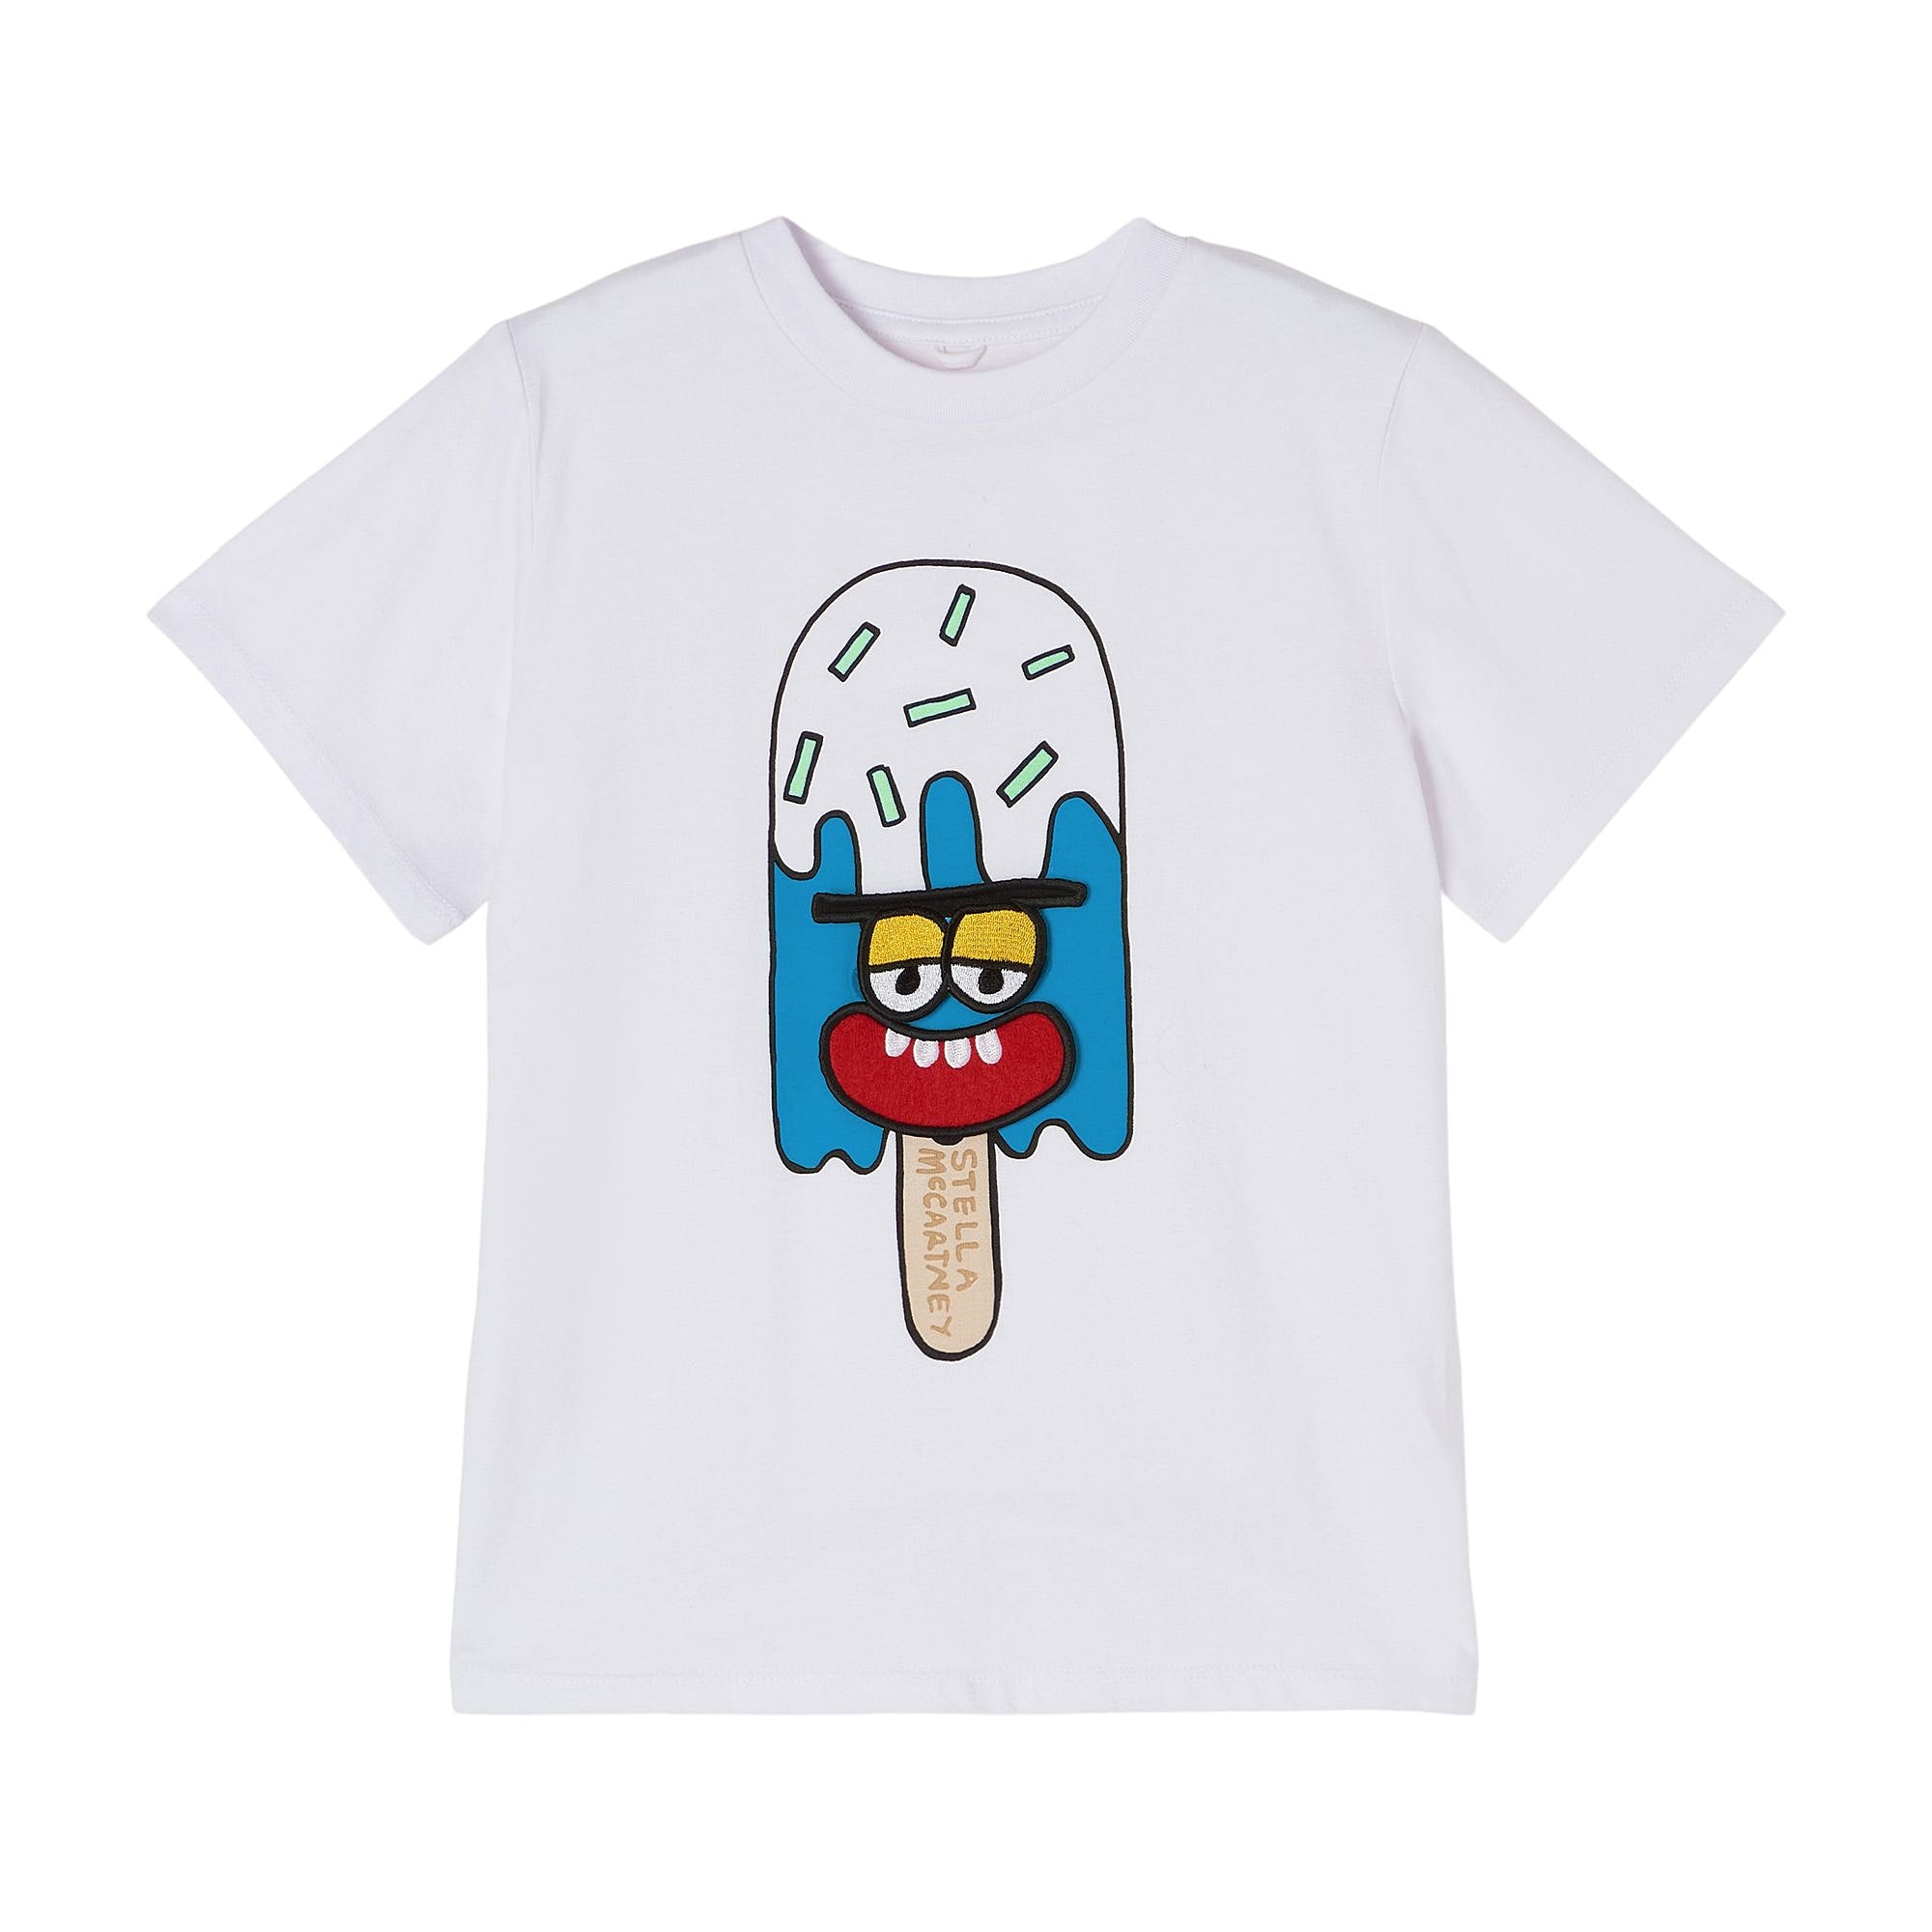 BOYS COTTON JERSEY TEE W/ICE LOLLY PR &
BADGES, WHITE